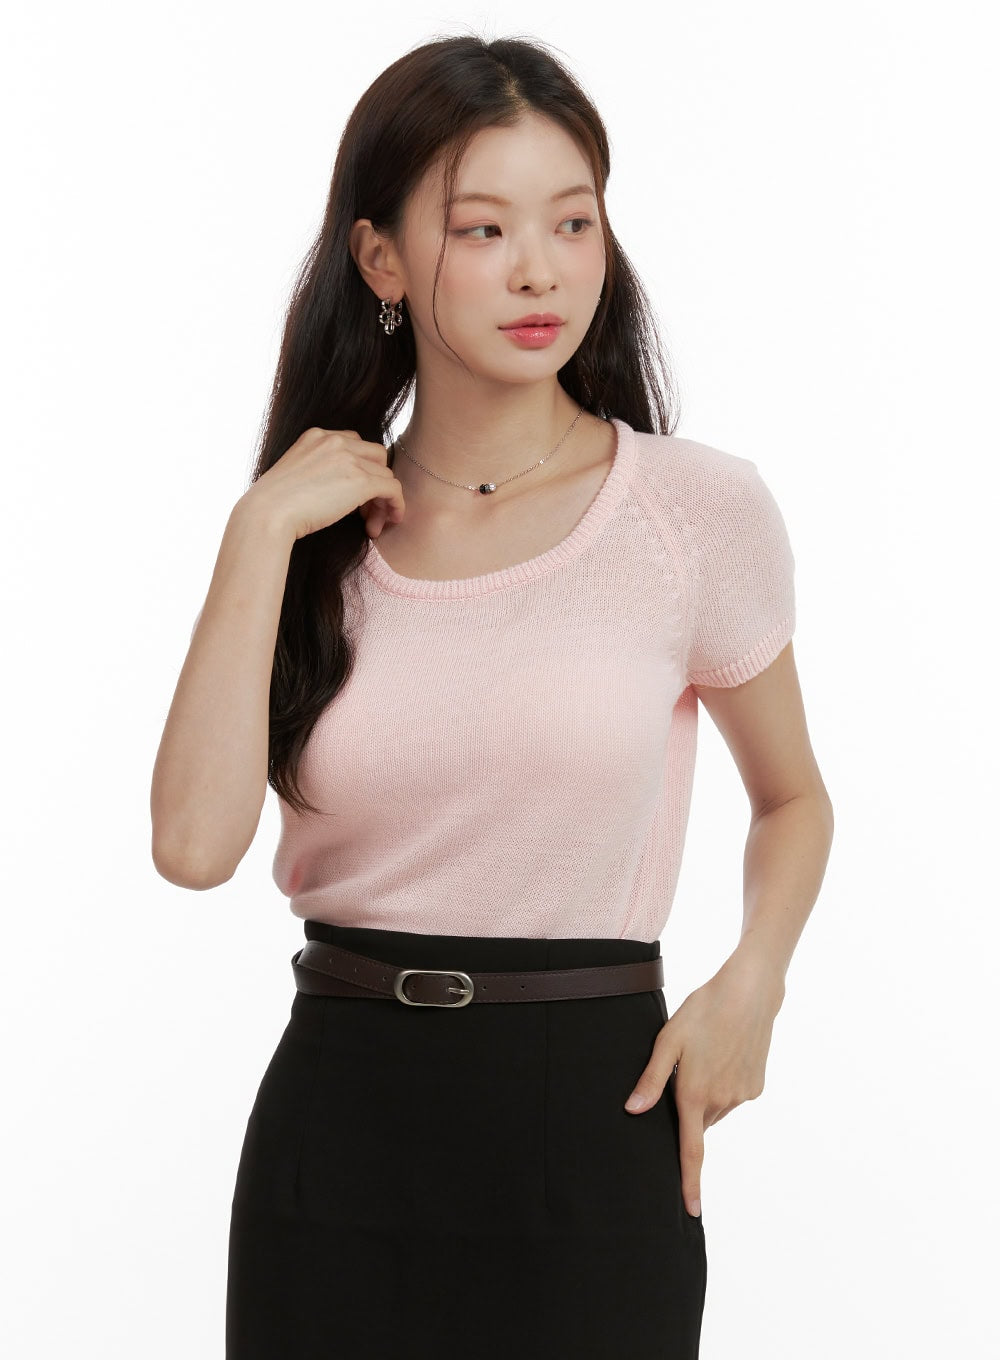 round-neck-short-sleeve-knit-top-ou411